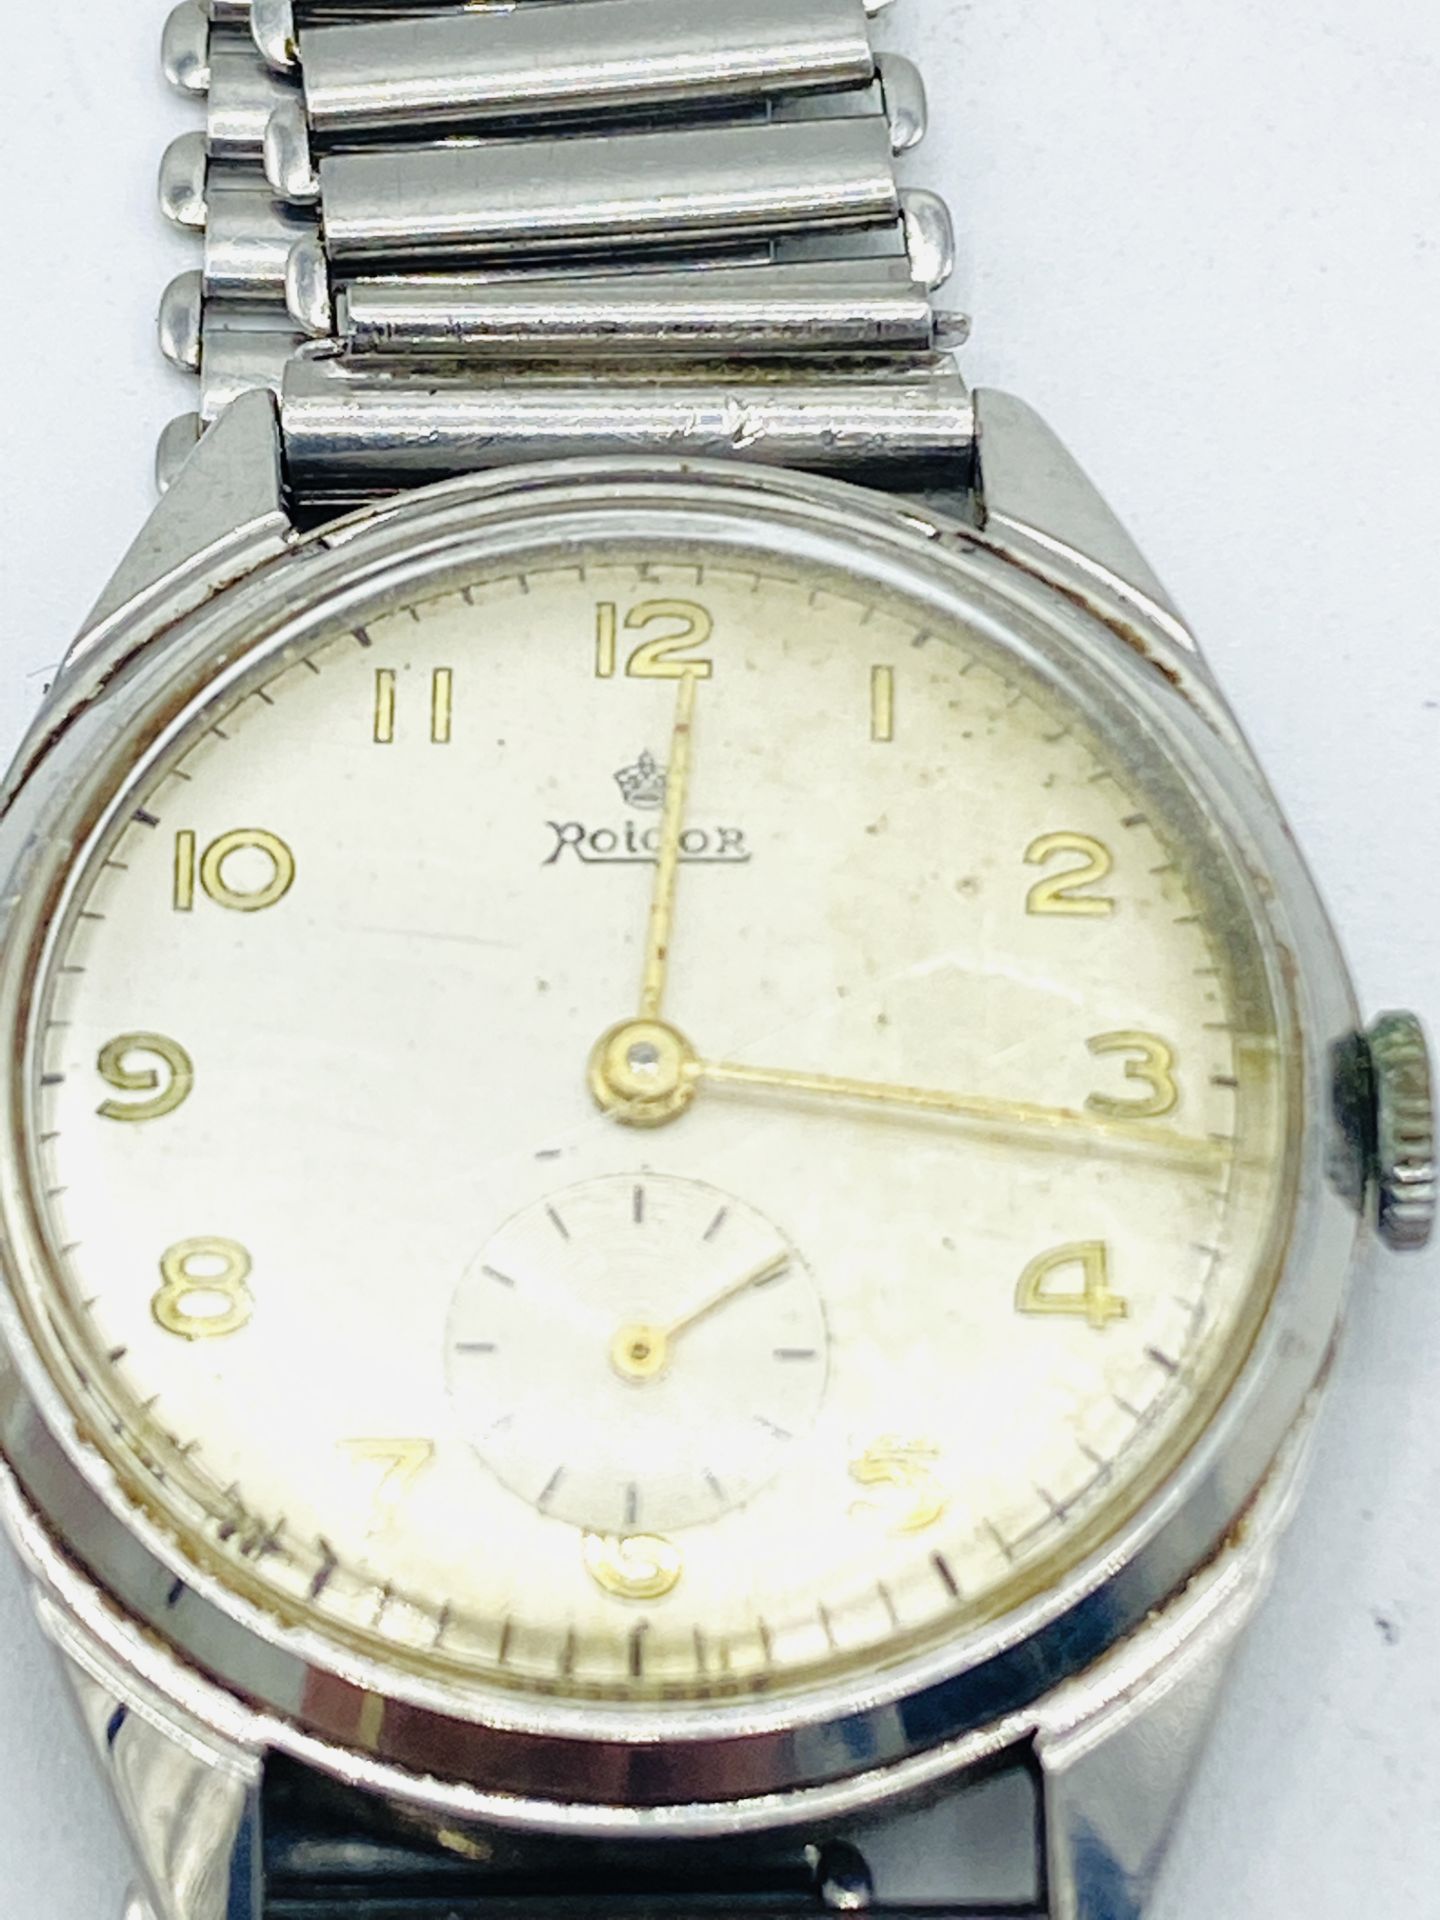 Rolex Oyster manual wind wrist watch, together with a 'Roidor' manual wind wrist watch - Image 2 of 6